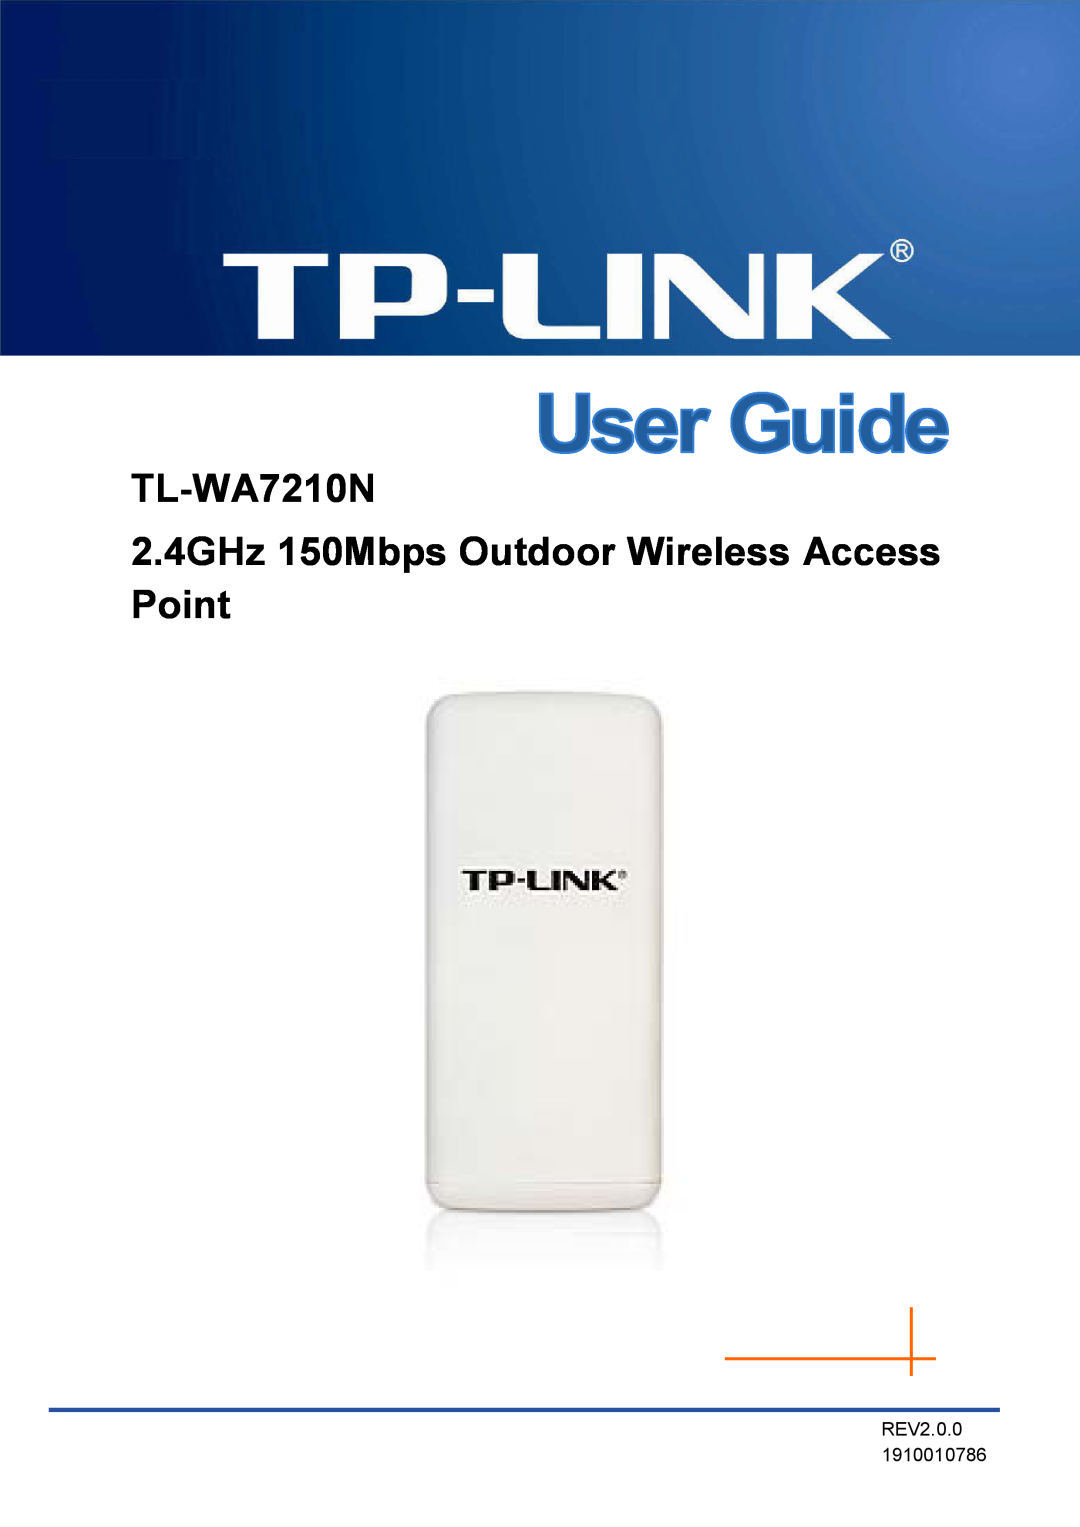 TP-Link manual TL-WA7210N 2.4GHz 150Mbps Outdoor Wireless Access Point, REV2.0.0 1910010786 